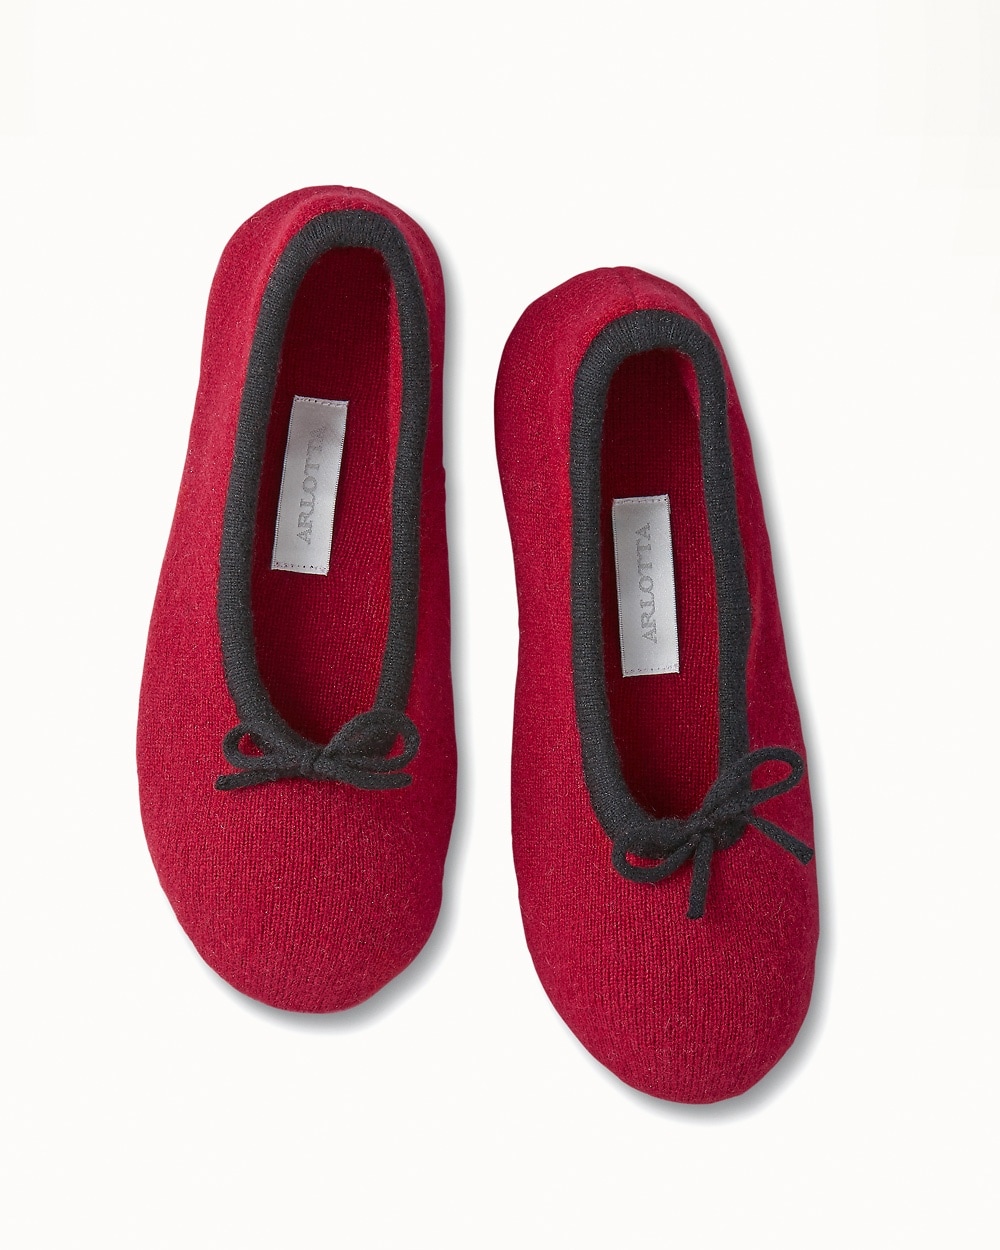 Arlotta Drawcord Cashmere Slippers Bordeaux And Black